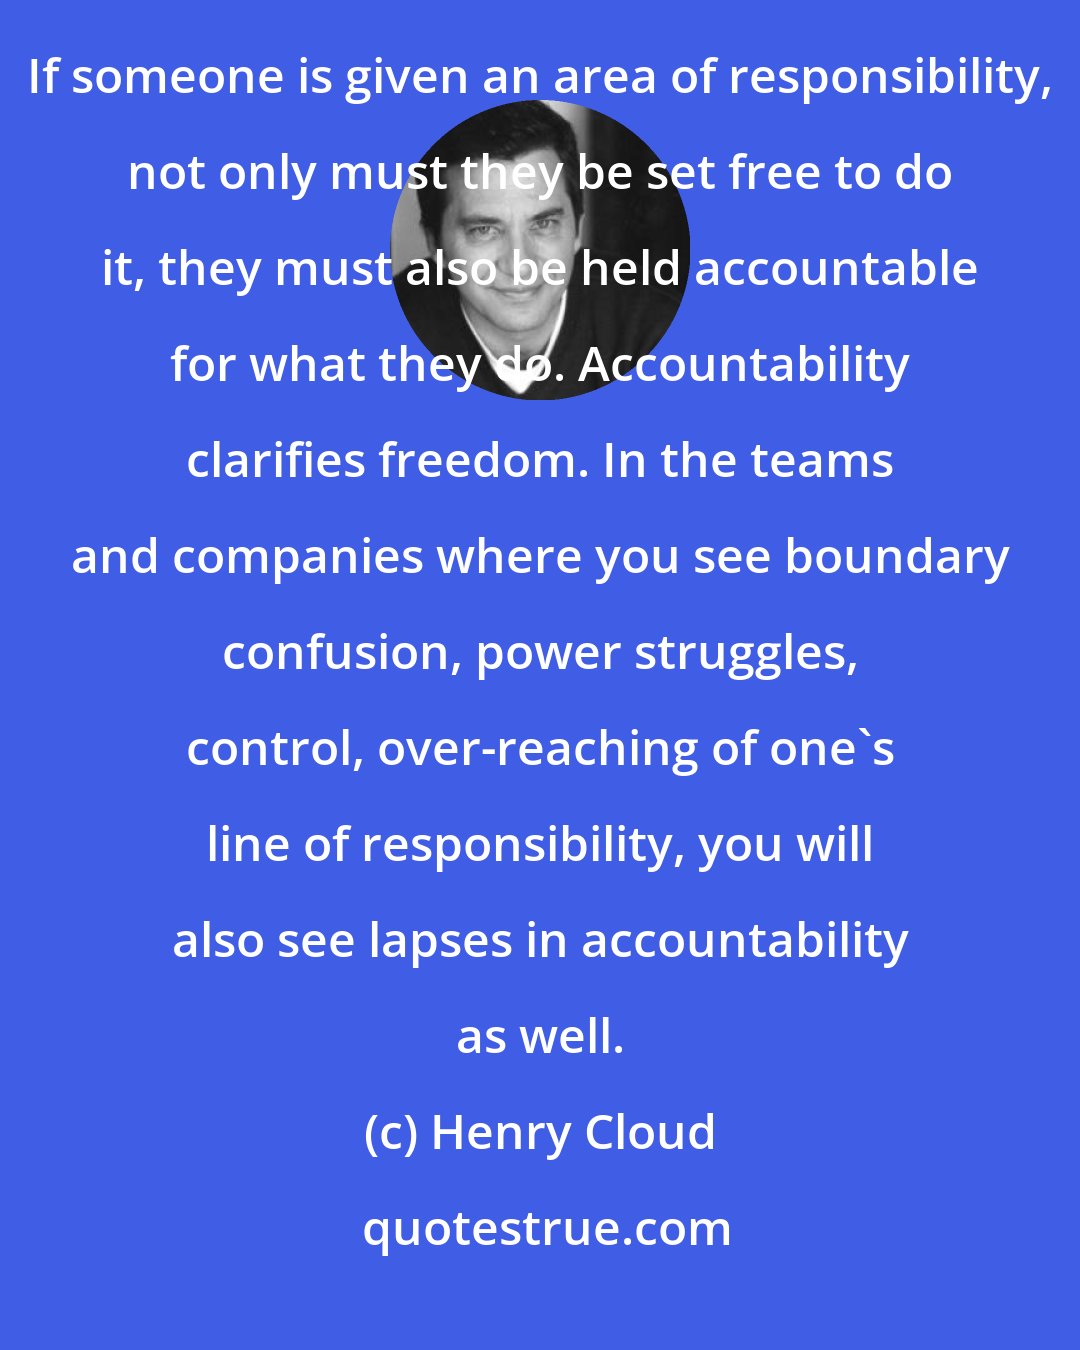 Henry Cloud: The twin sister to autonomy and freedom is responsibility and accountability. You cannot have one with out the other. If someone is given an area of responsibility, not only must they be set free to do it, they must also be held accountable for what they do. Accountability clarifies freedom. In the teams and companies where you see boundary confusion, power struggles, control, over-reaching of one's line of responsibility, you will also see lapses in accountability as well.